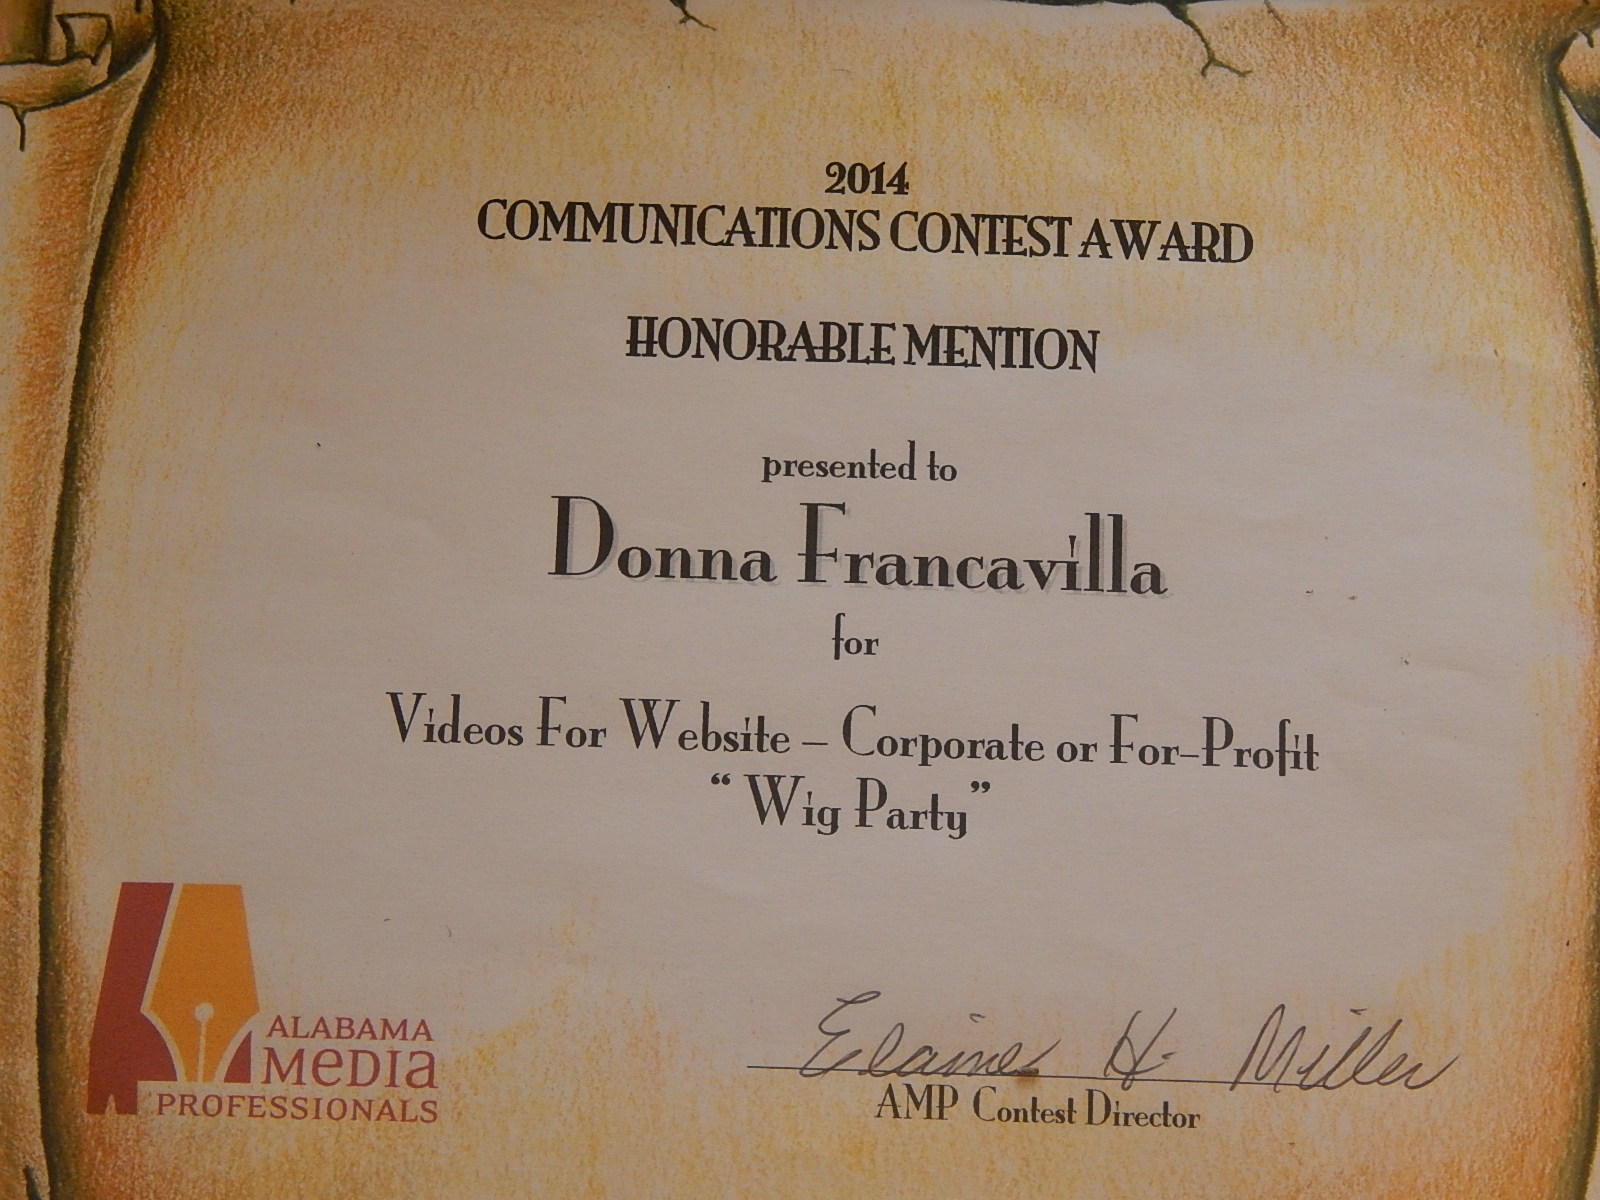 2014 Alabama Media Professionals Communications Contest Award – Honorable Mention  presented to Donna Francavilla for Videos for Website, Corporate or For-Profit – “Wig Party”